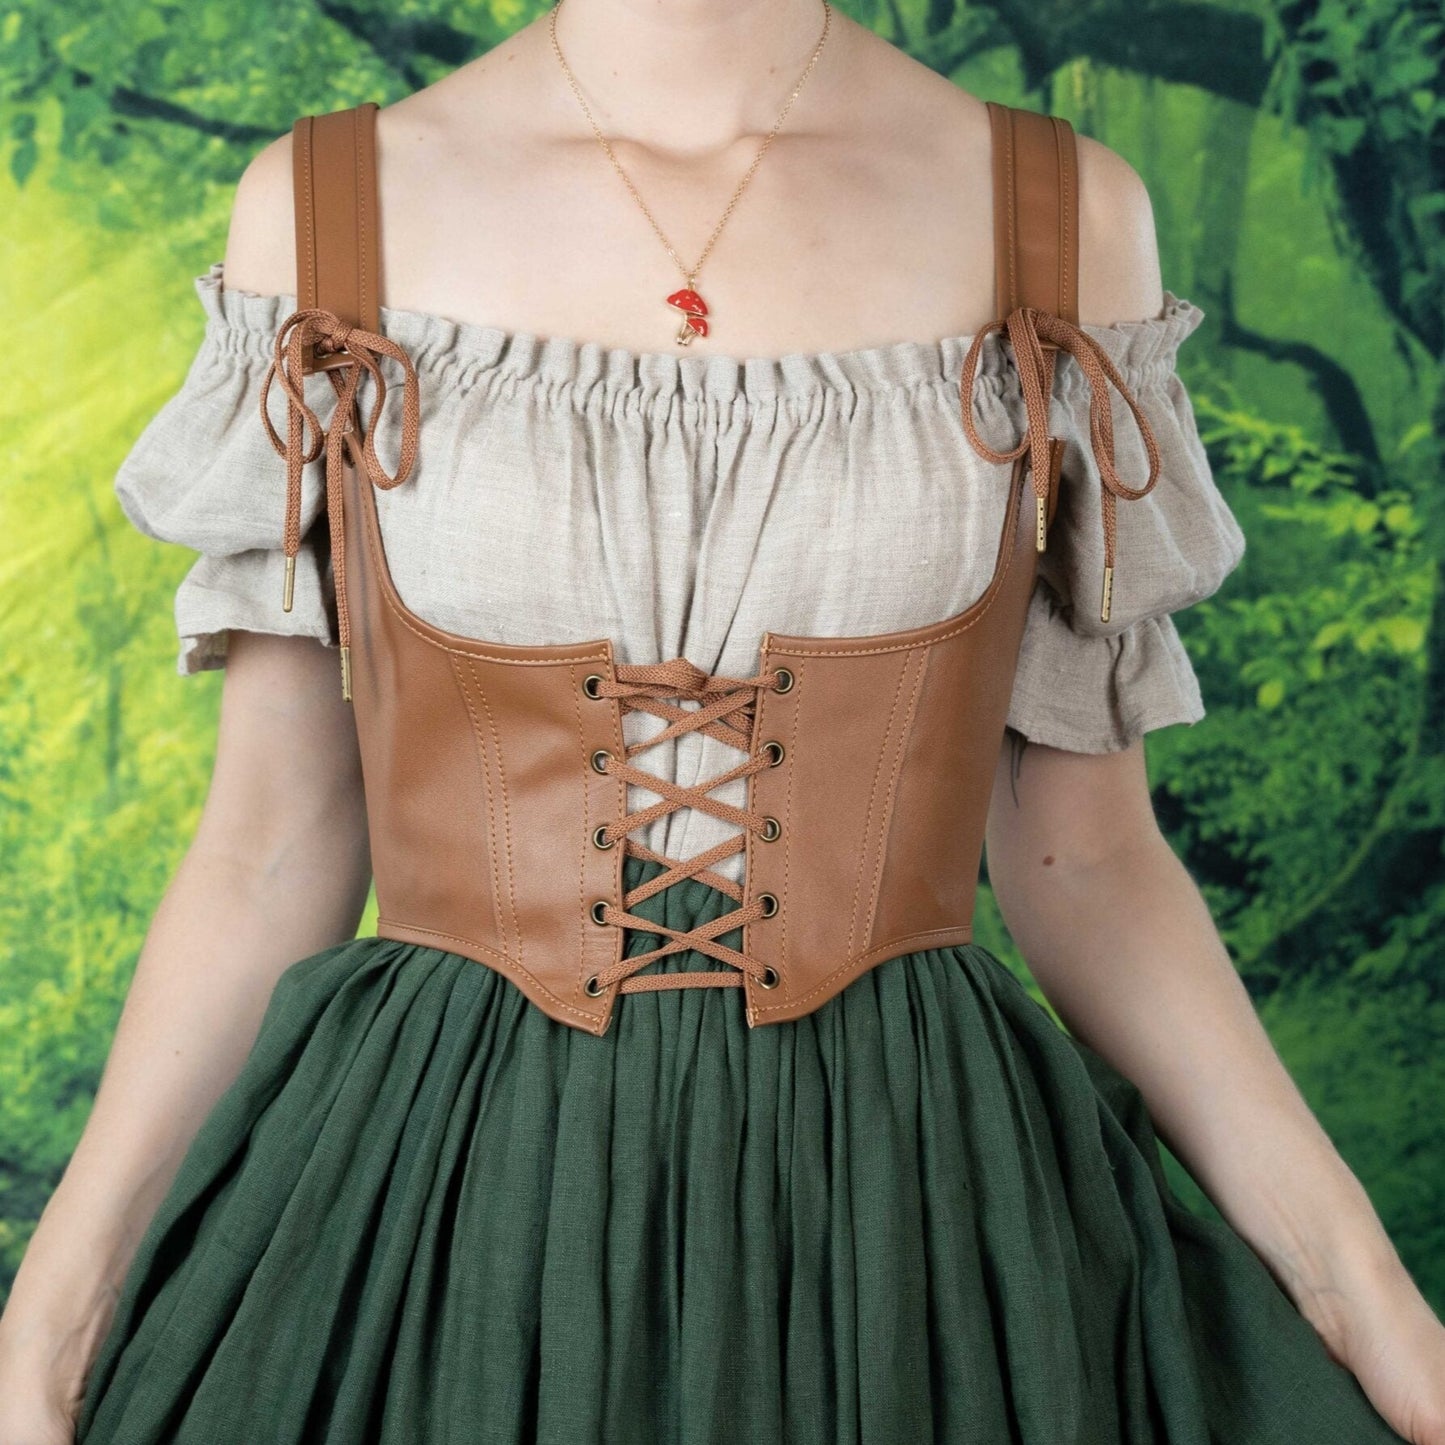 Leather Underbust Corset Belt – French Meadows